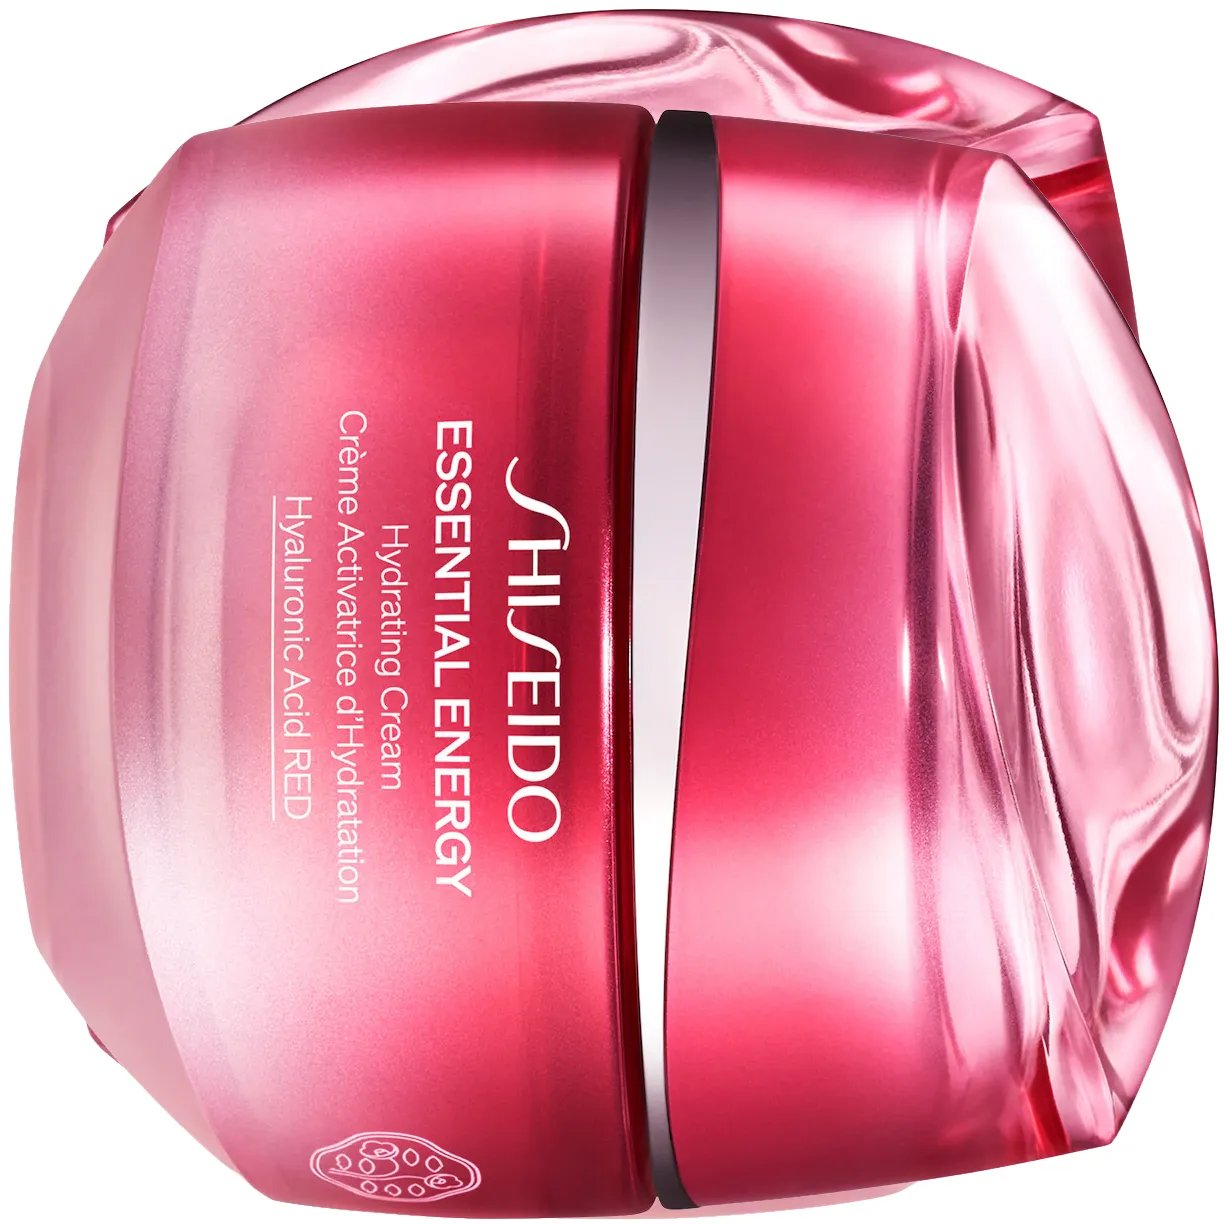 Free Two Personalized Skincare Samples By Shiseido